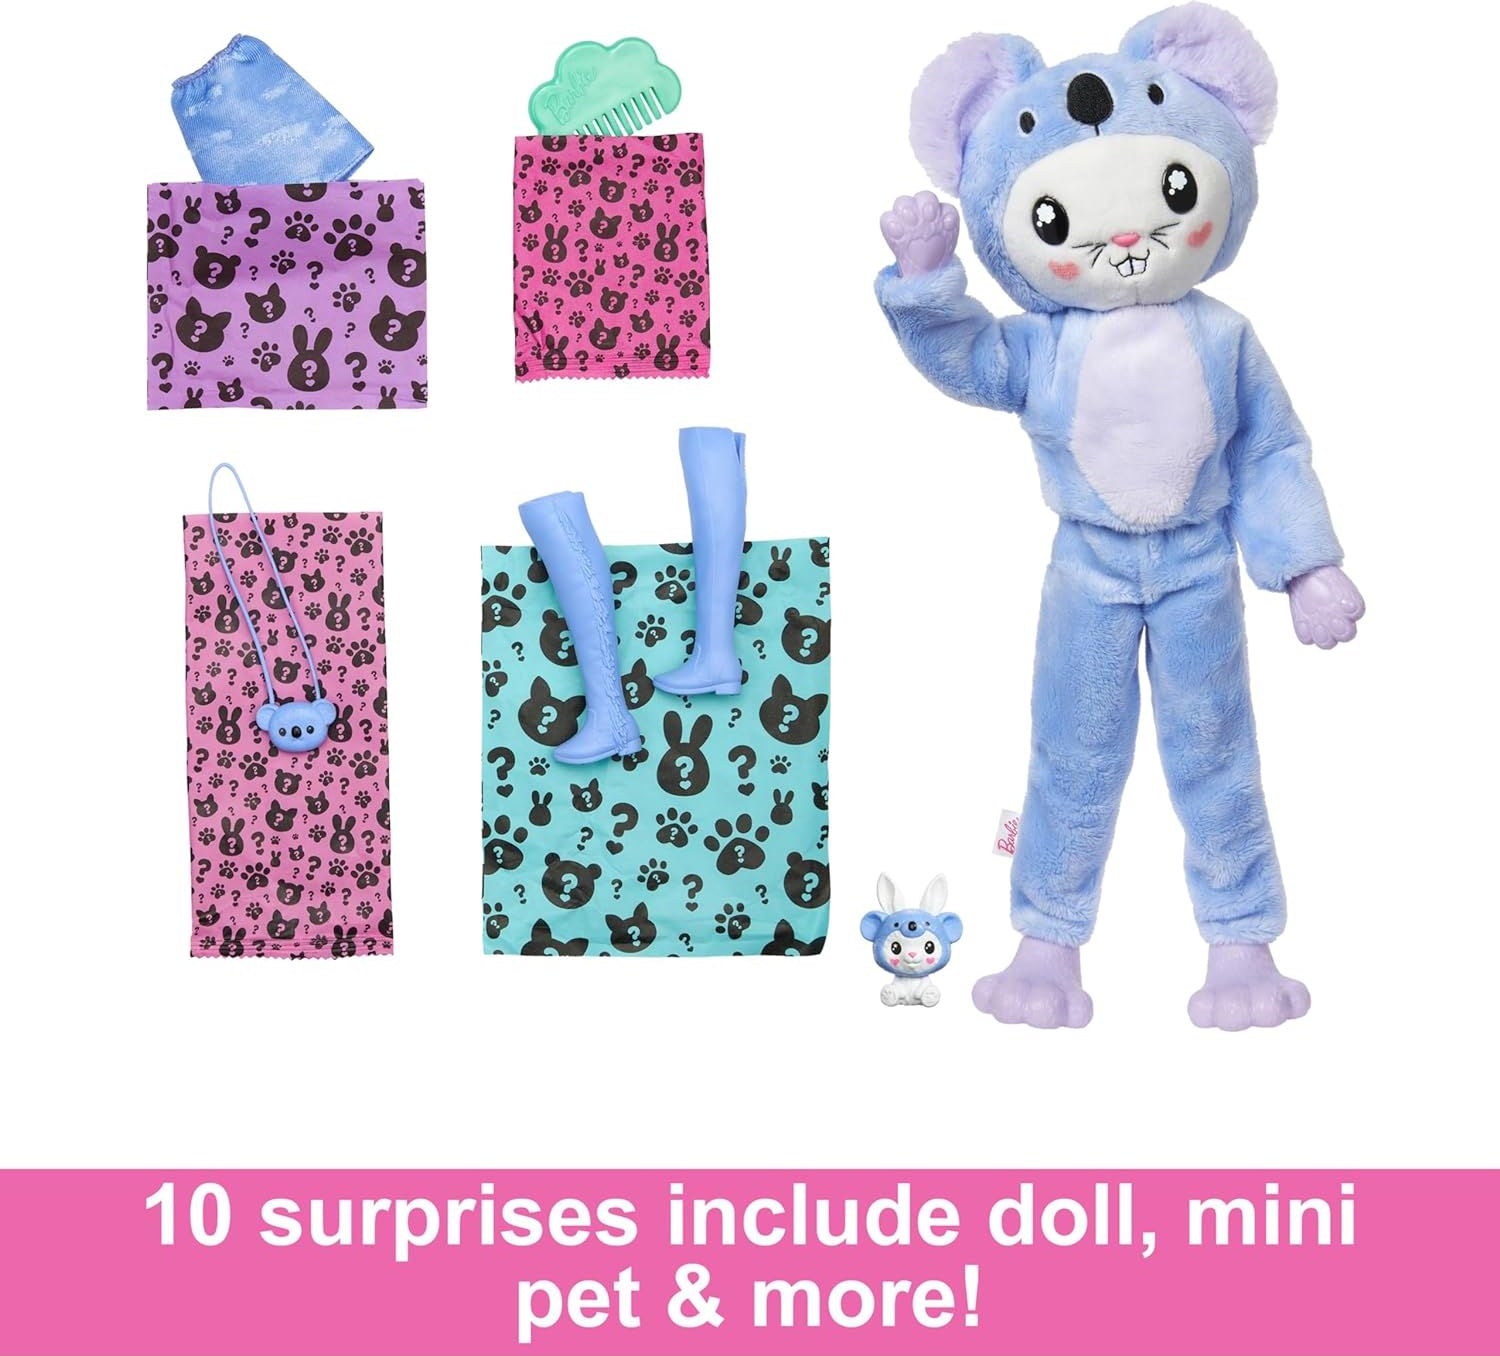 Barbie Cutie Reveal Doll & Accessories with Animal Plush Costume & 10 Surprises Including Color Change Easter Basket Stuffers, Bunny as a Koala in Costume-Themed Series